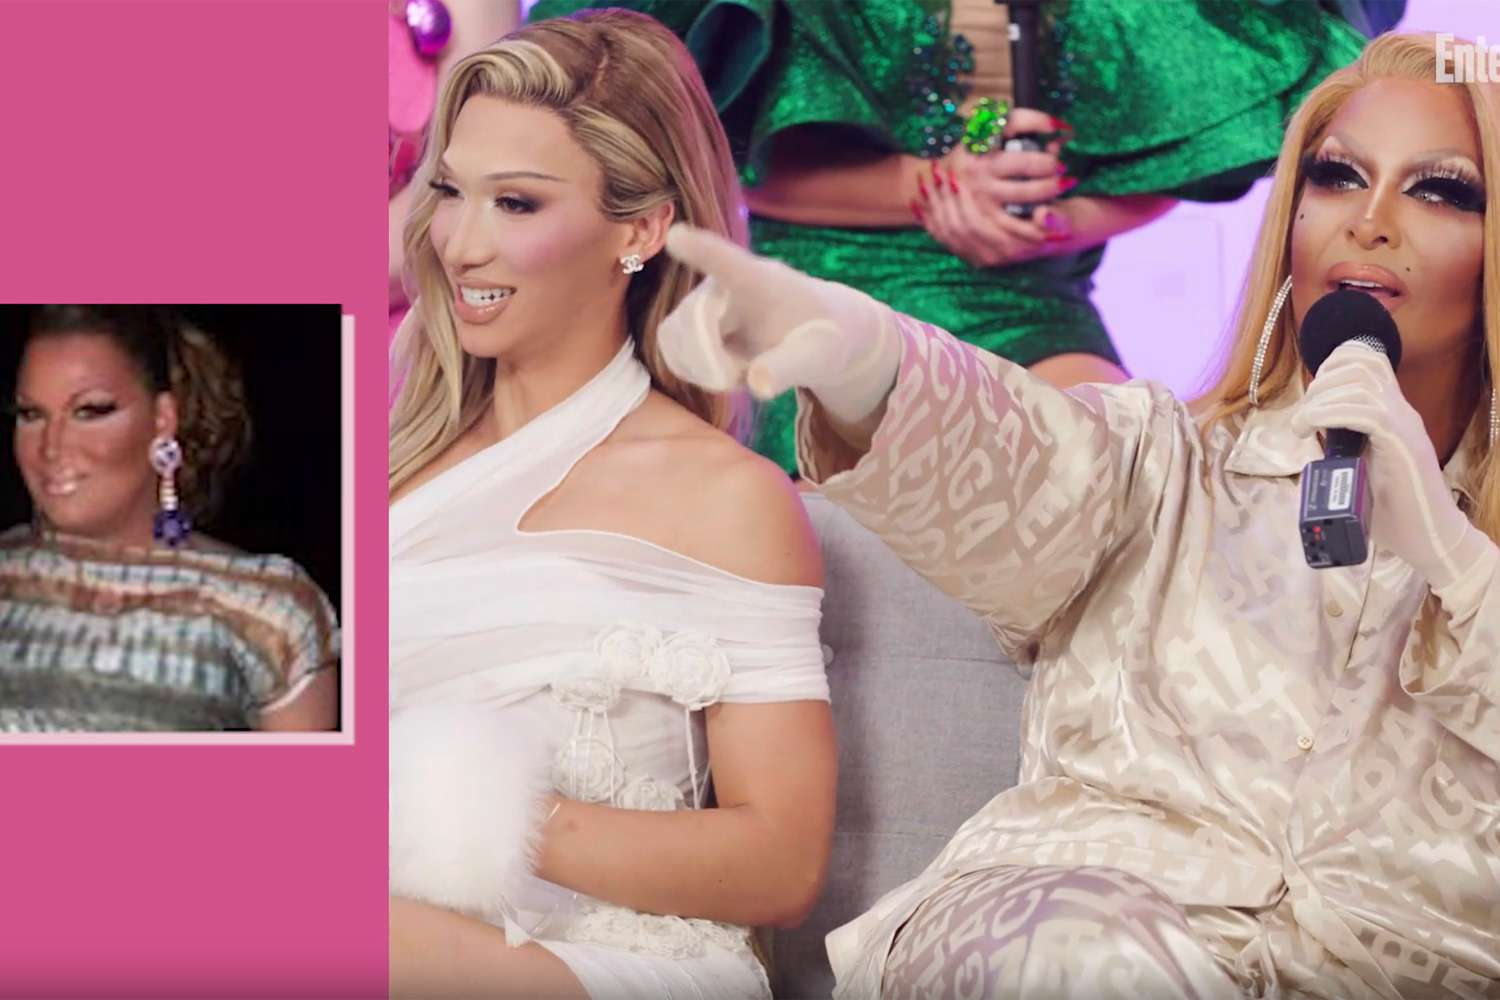 Watch 'Drag Race' queens rip each other's early looks apart: 'You CAN read the doll!'